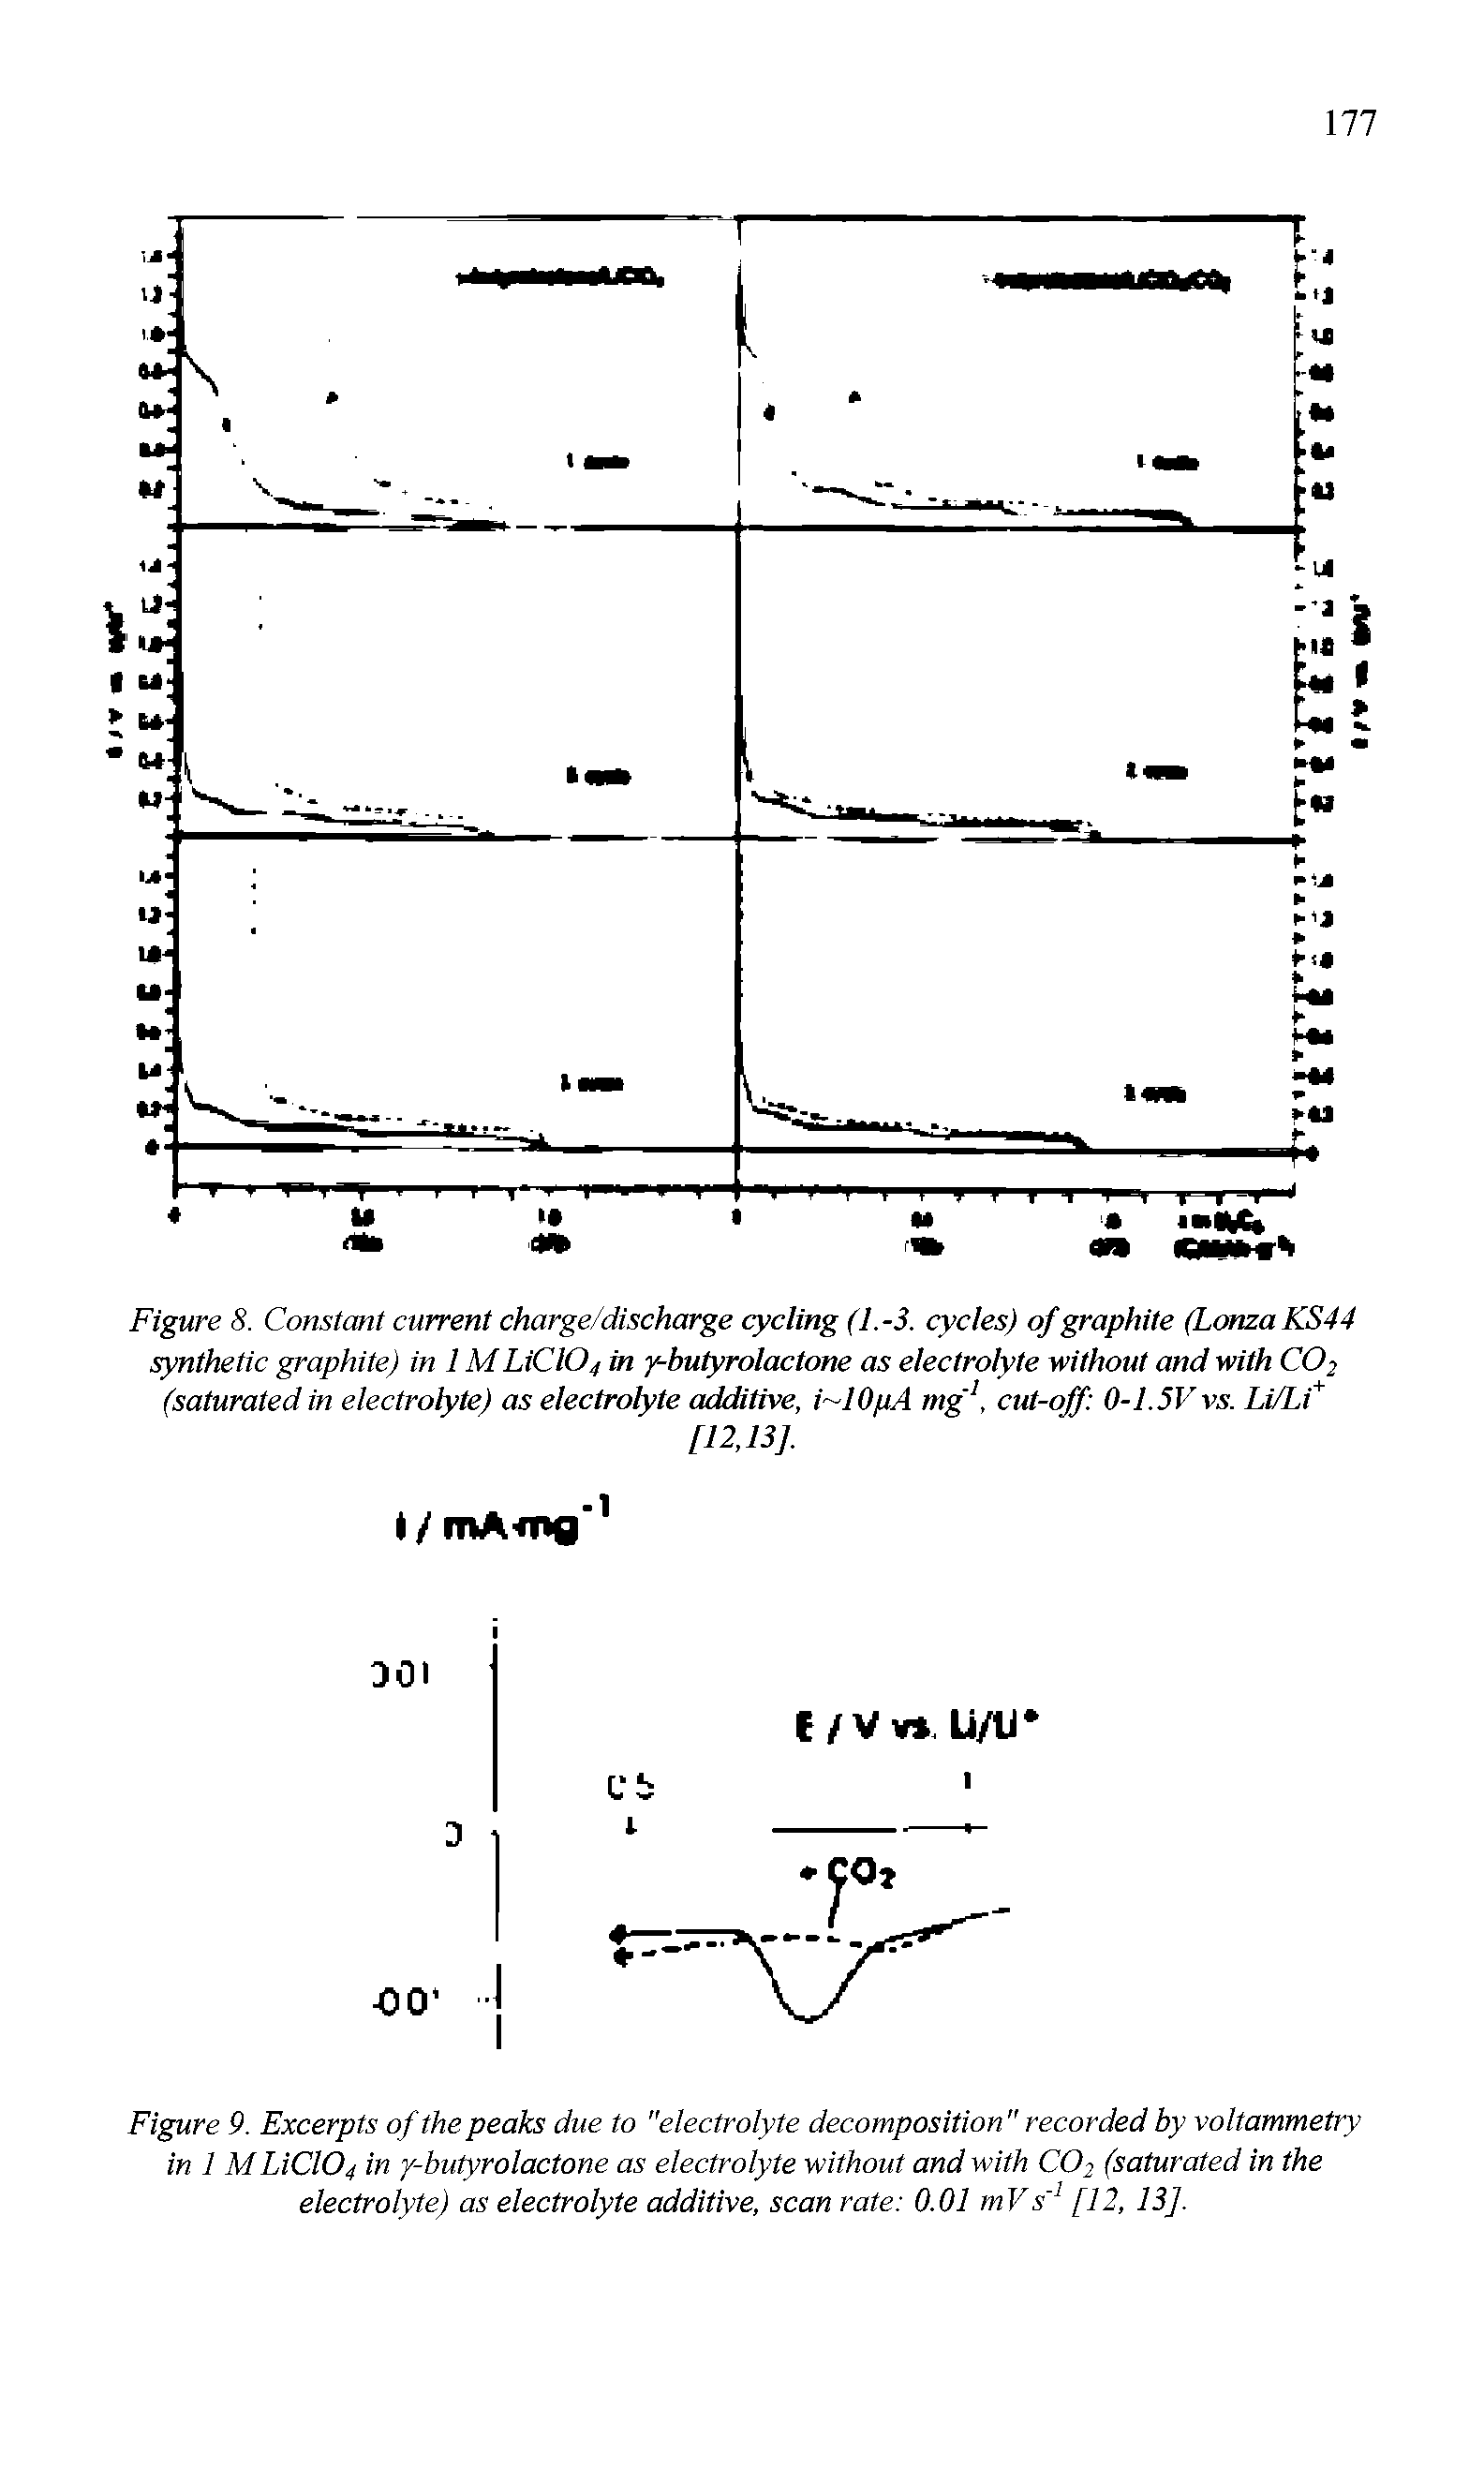 Figure 9. Excerpts of the peaks due to "electrolyte decomposition " recorded by voltammetry in 1 MLiCl04 in y-butyrolactone as electrolyte without and with C02 (saturated in the electrolyte) as electrolyte additive, scan rate 0.01 mV s 1 [12, 13].